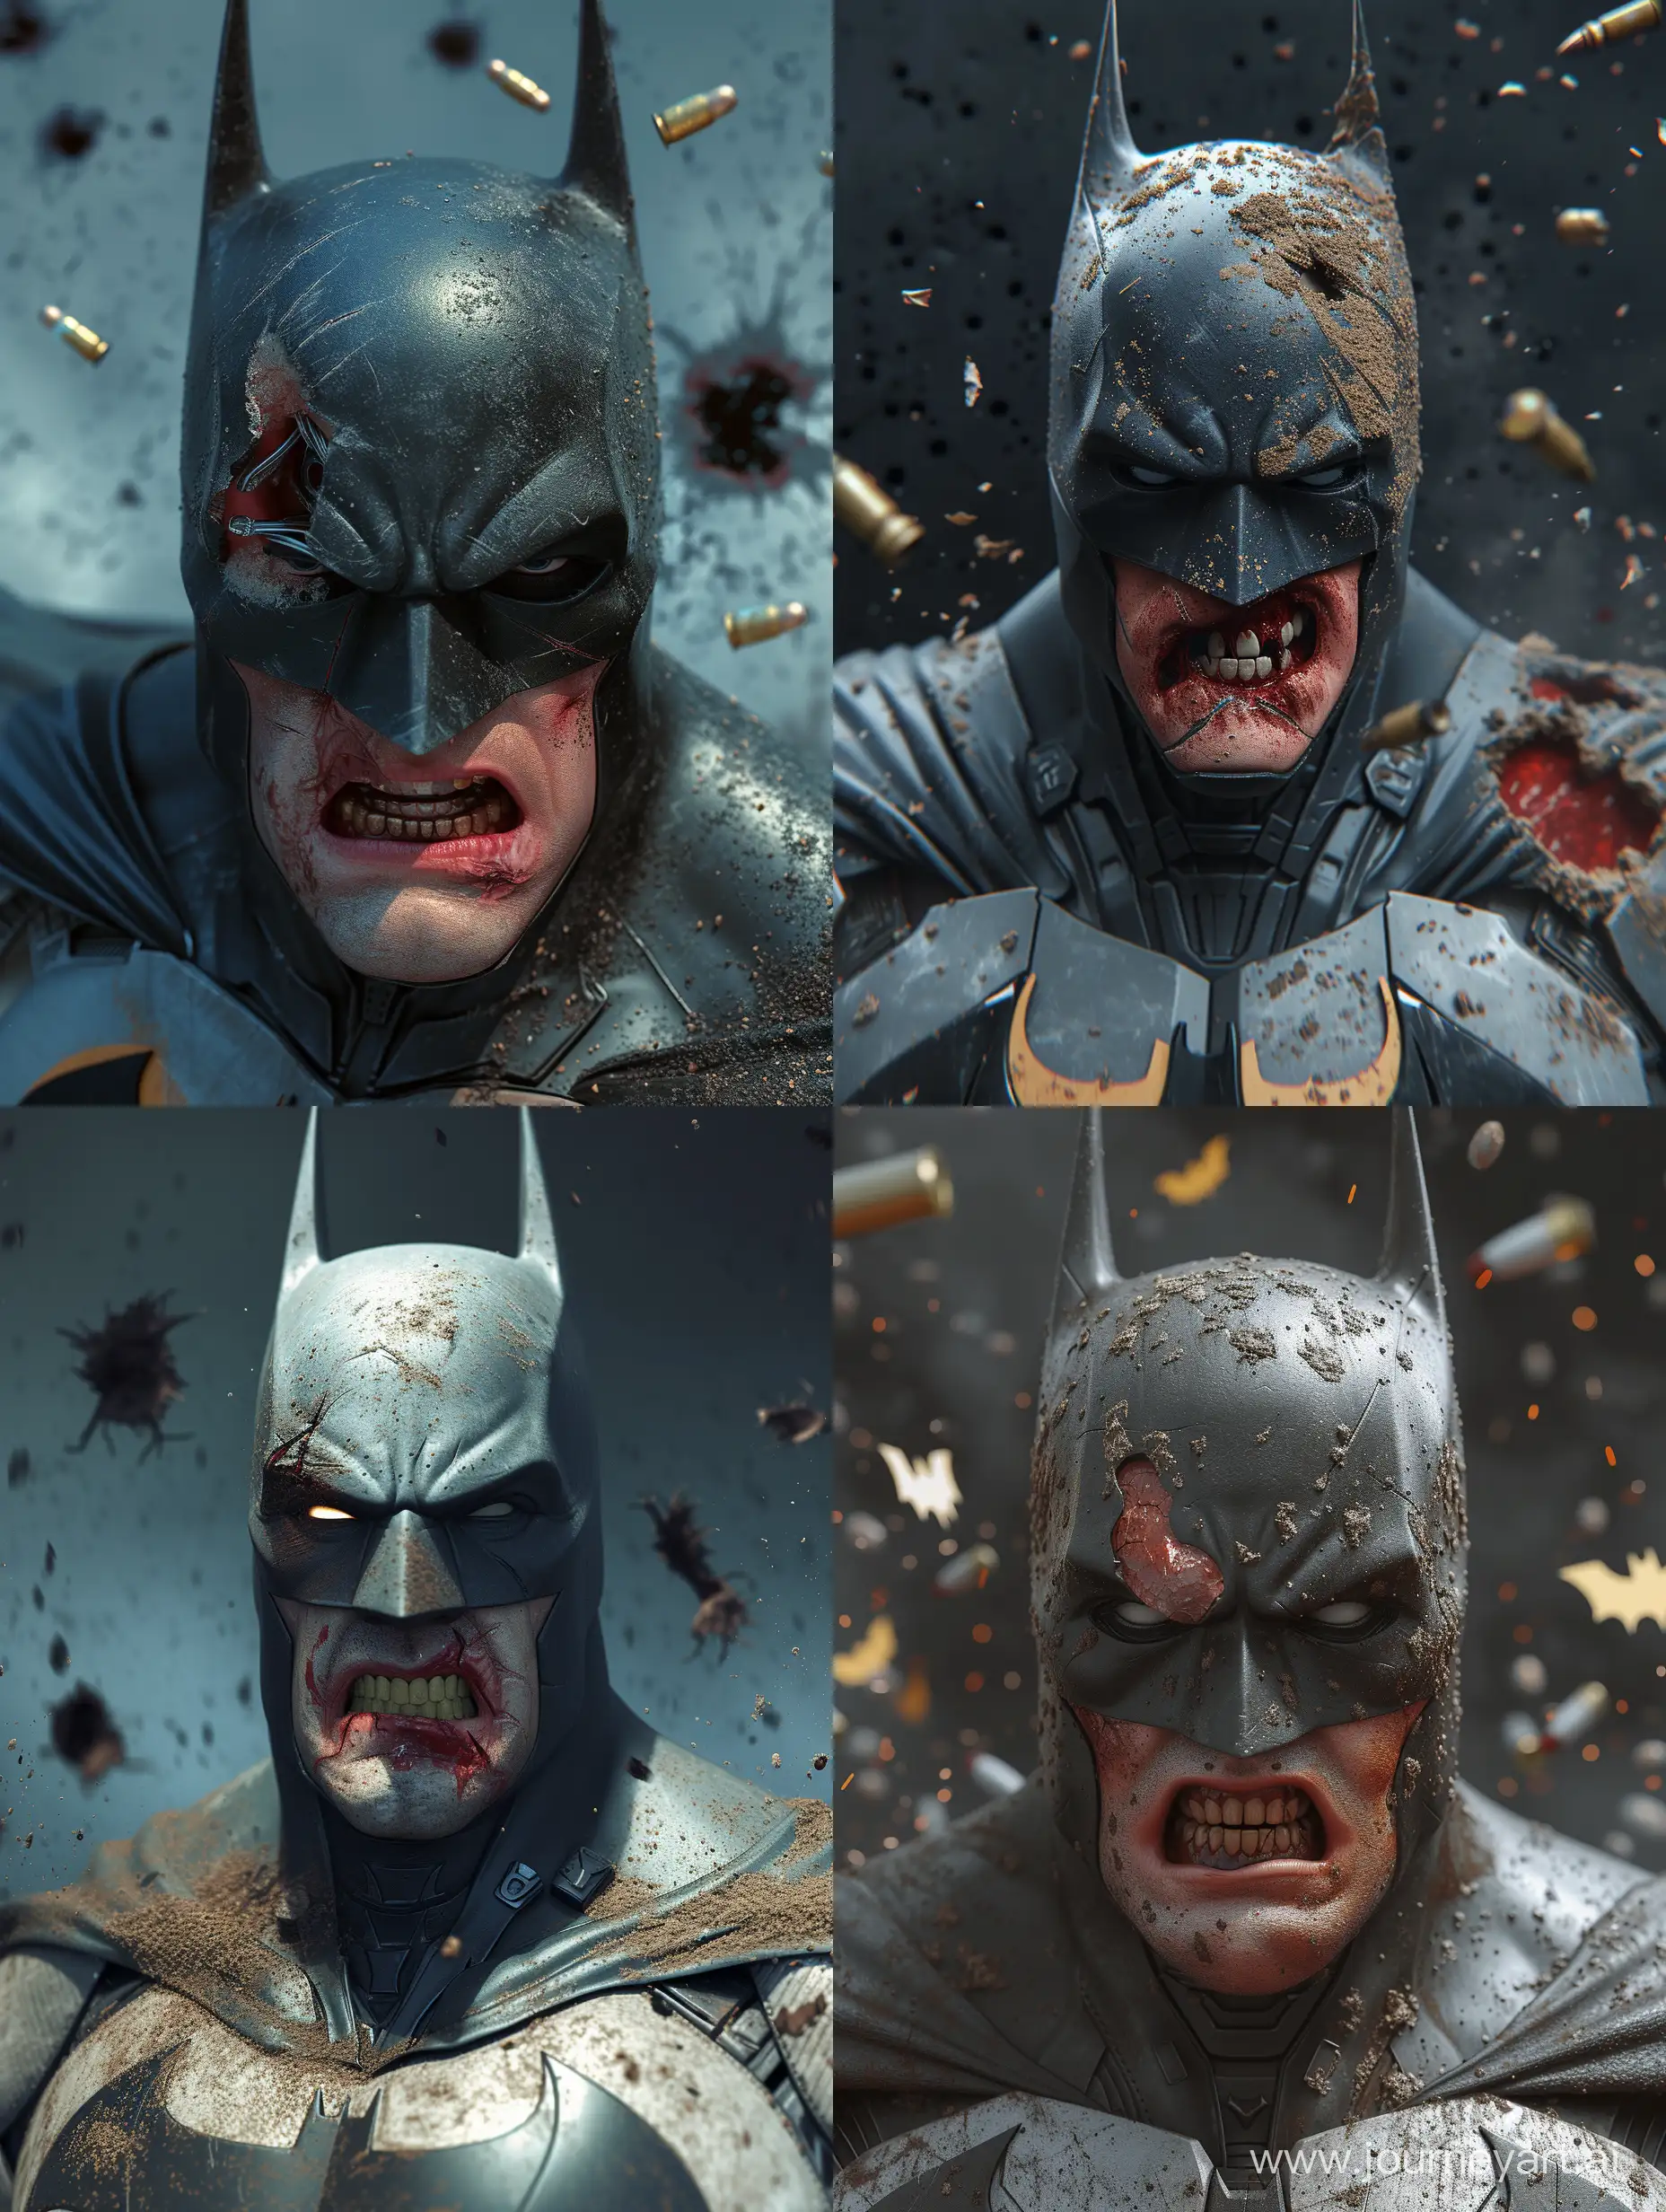 Damaged-Batman-Suit-Gritty-Realism-with-Bloodied-Cowl-and-Bullet-Holes